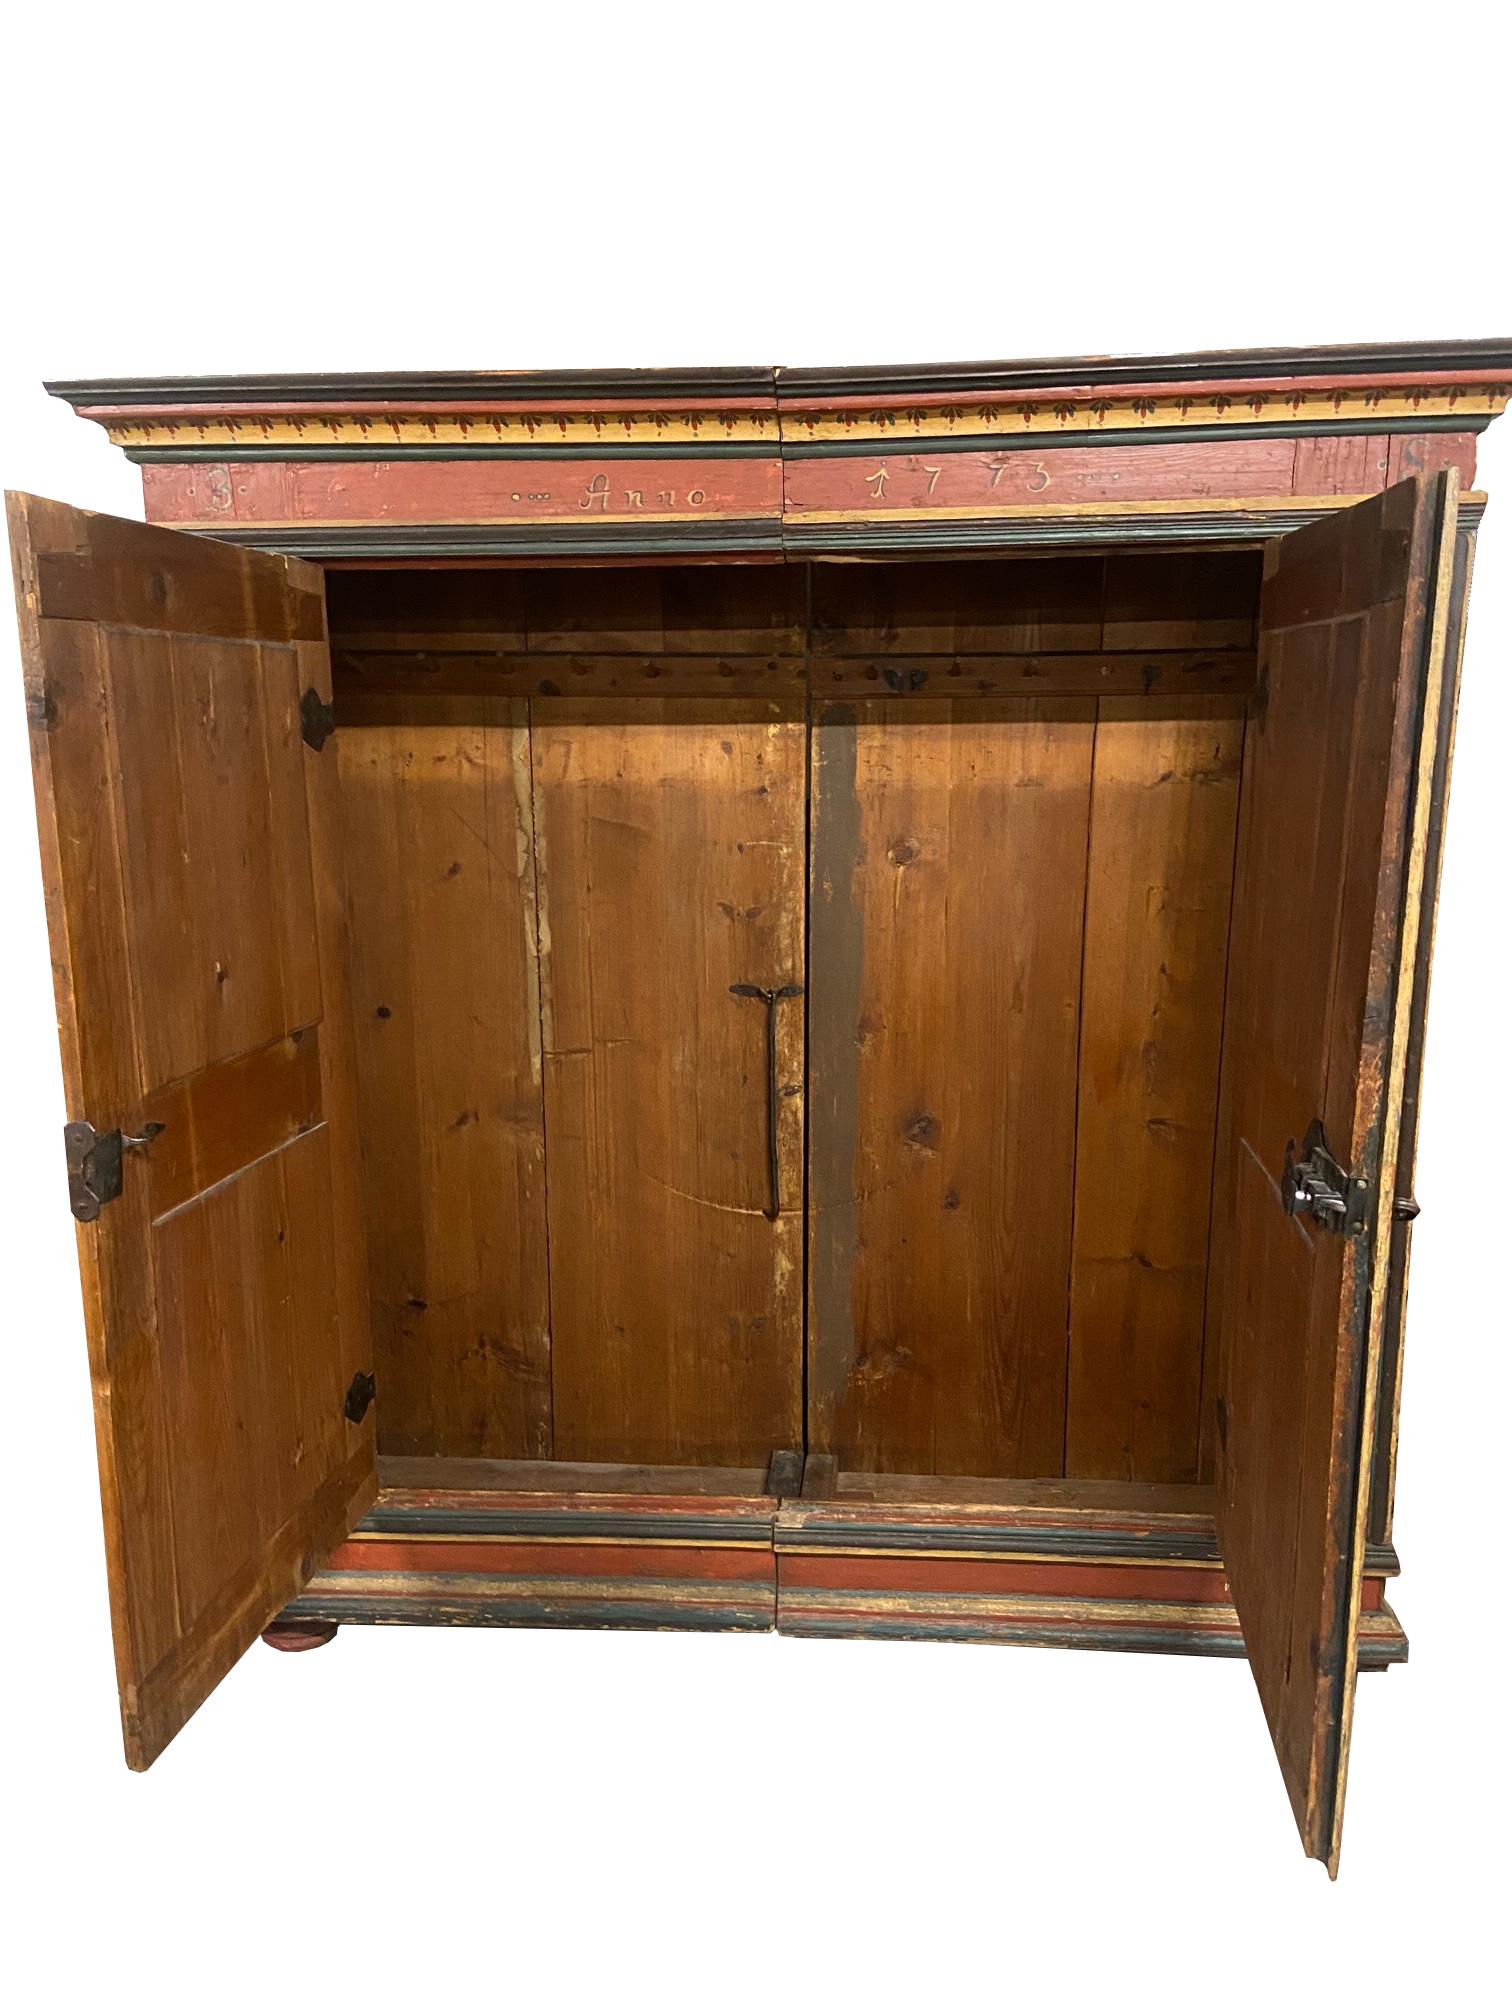 Hand-Painted 18th Century Hand Painted Bavarian Cupboard